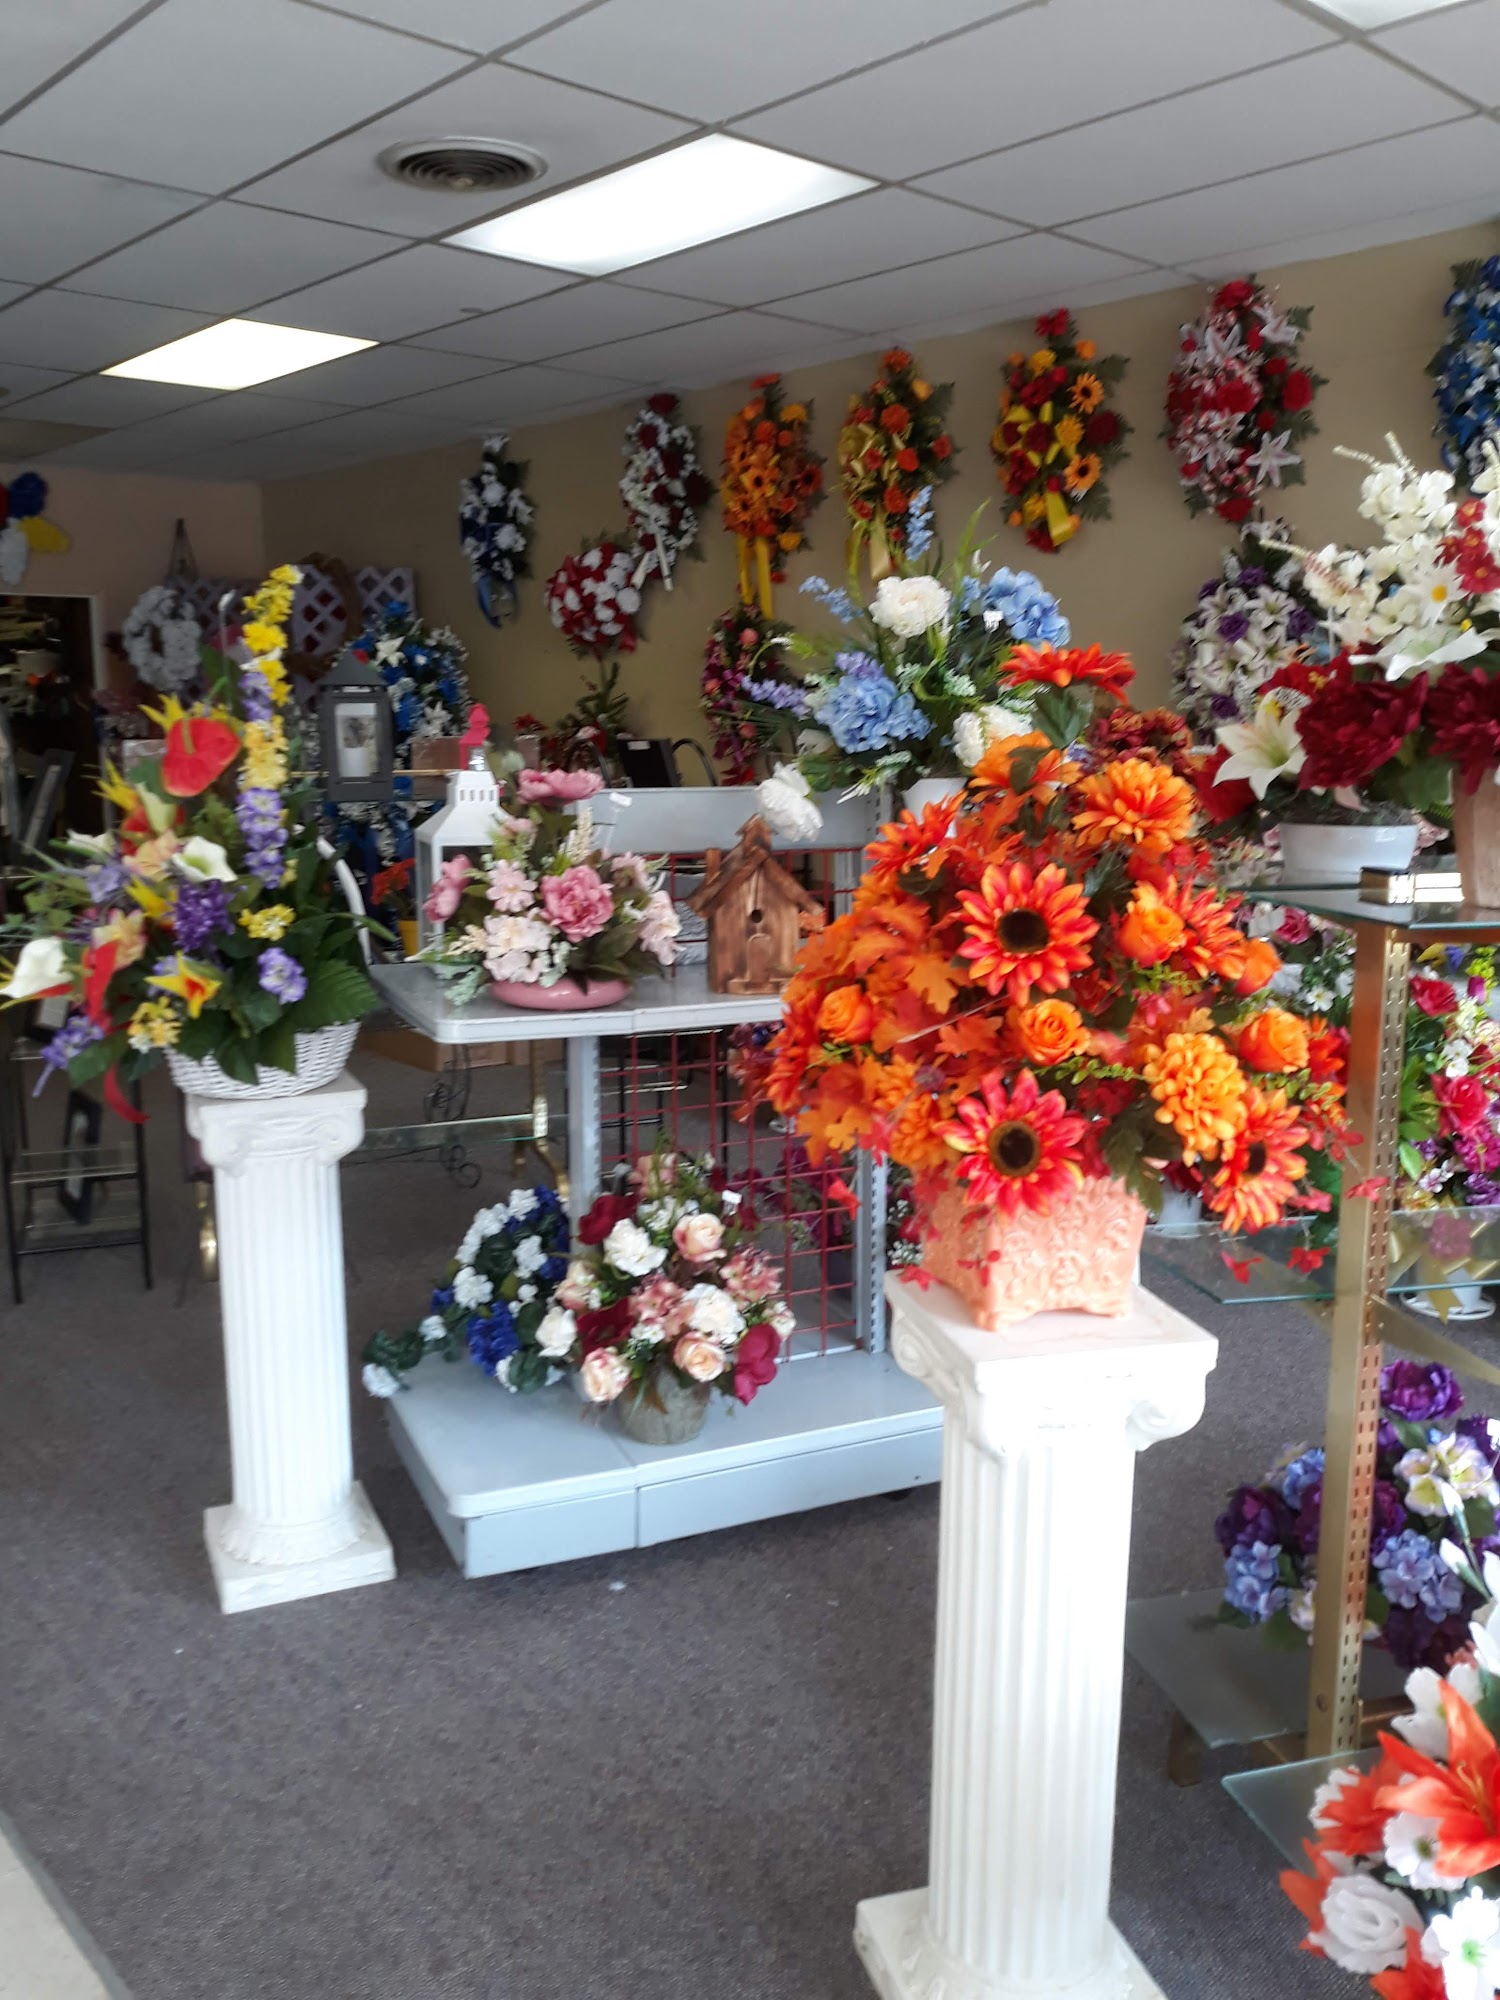 The Flower Boutique 402 W Sycamore St, Williamsburg Kentucky 40769